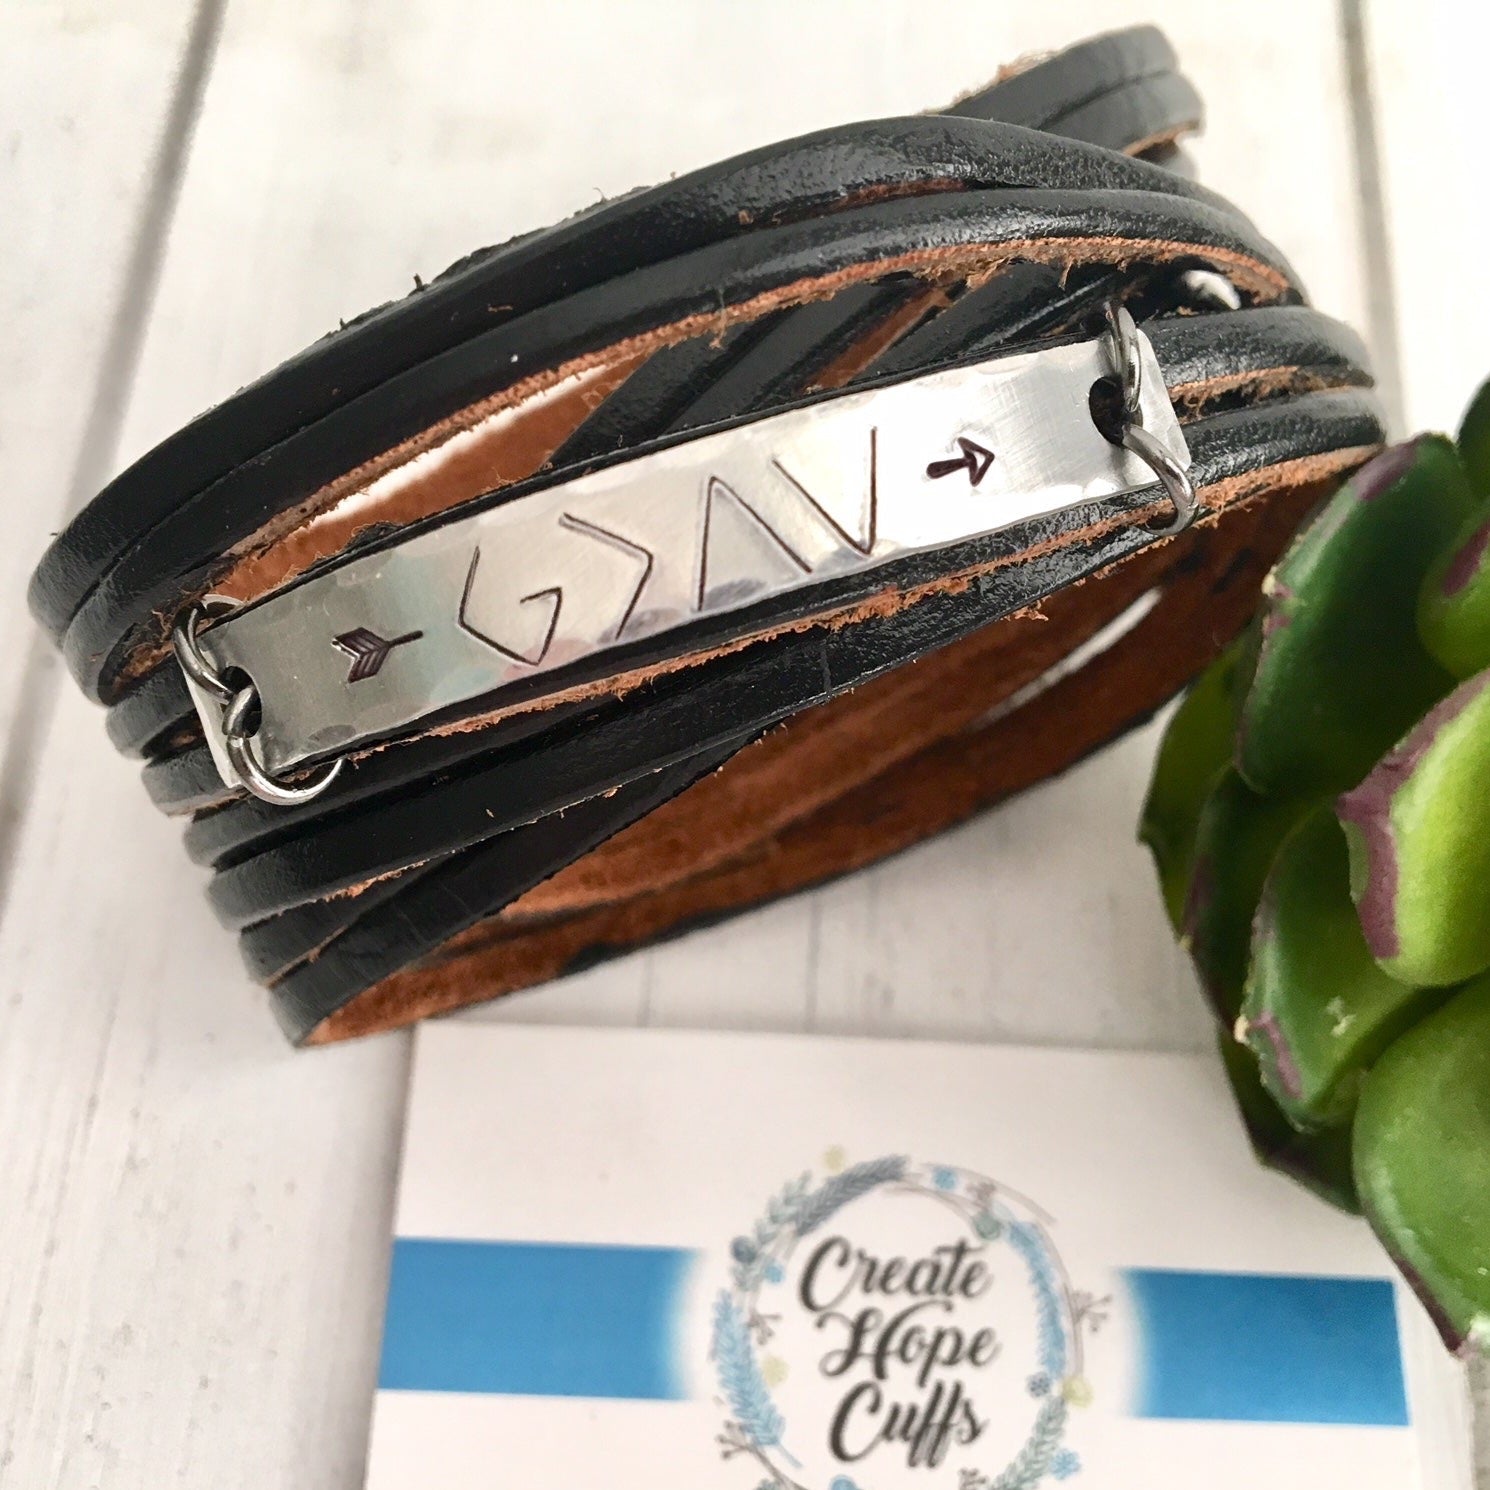 Best Seller! 'God is Greater' Leather Wrap, Silver Bar Bracelet, adjustable Leather Wrap Create Hope Cuffs 